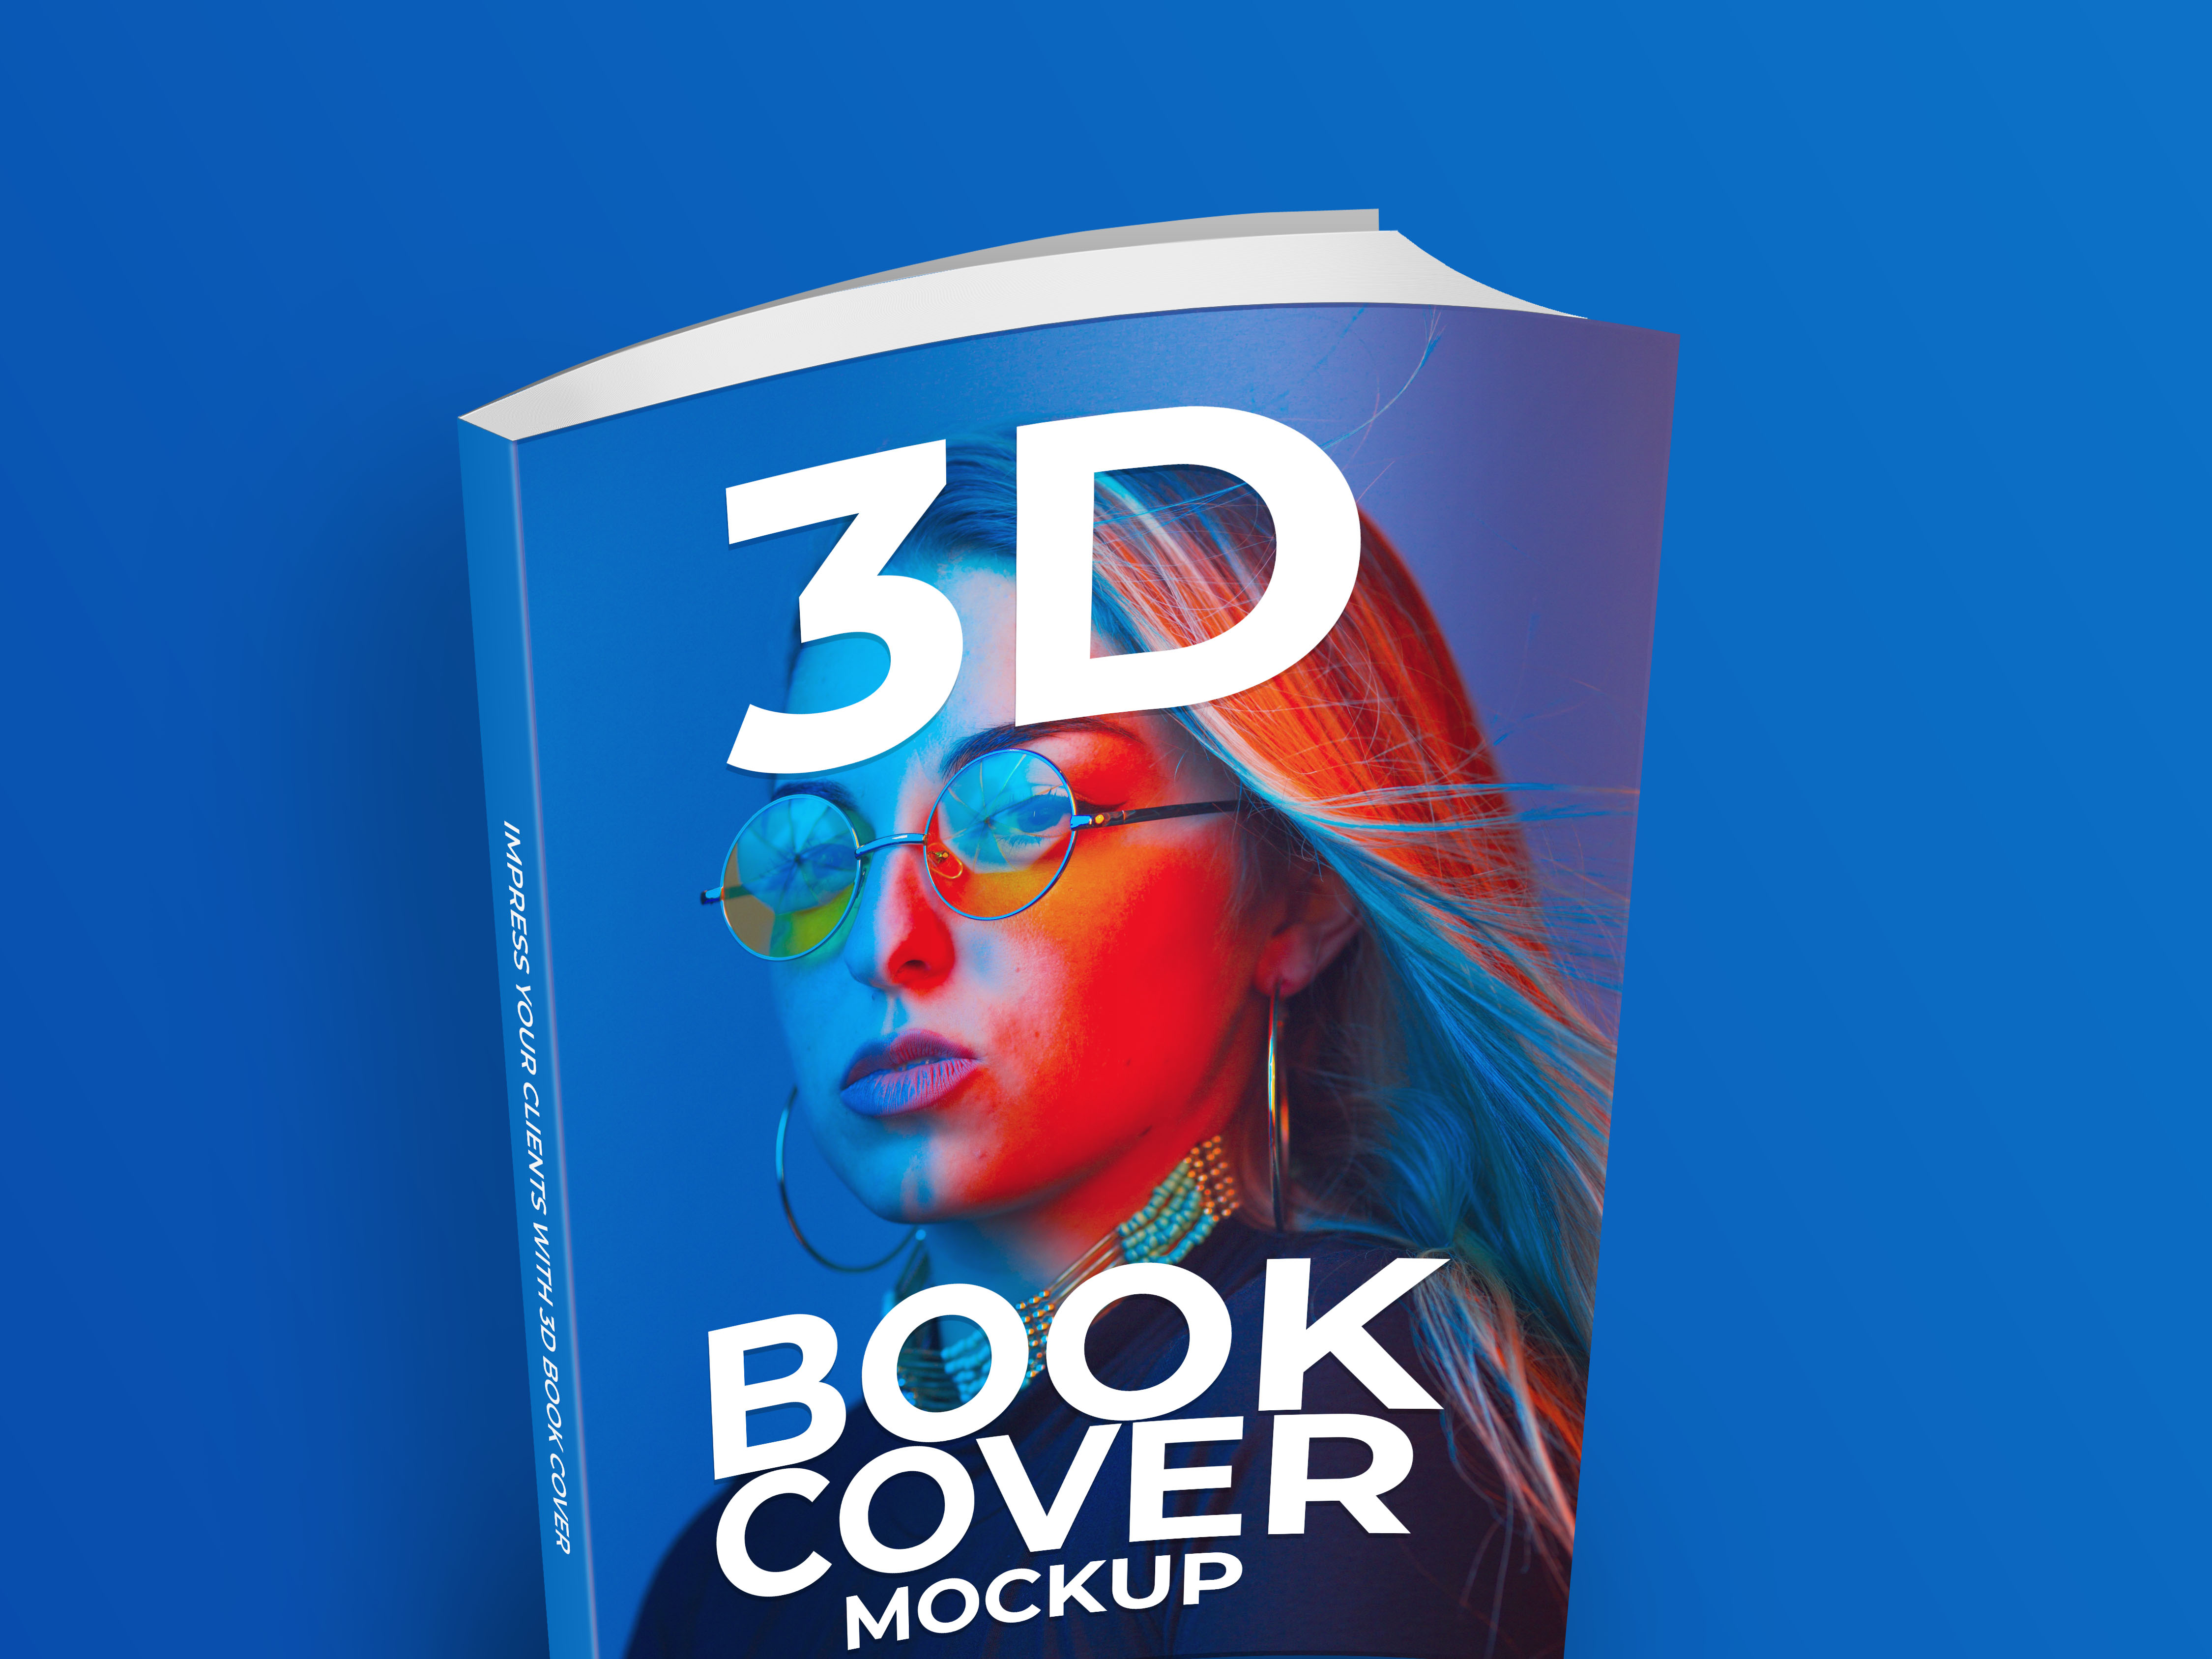 Download 3d Book Cover Mockup Free Psd Download by Aleena Cooley on ...